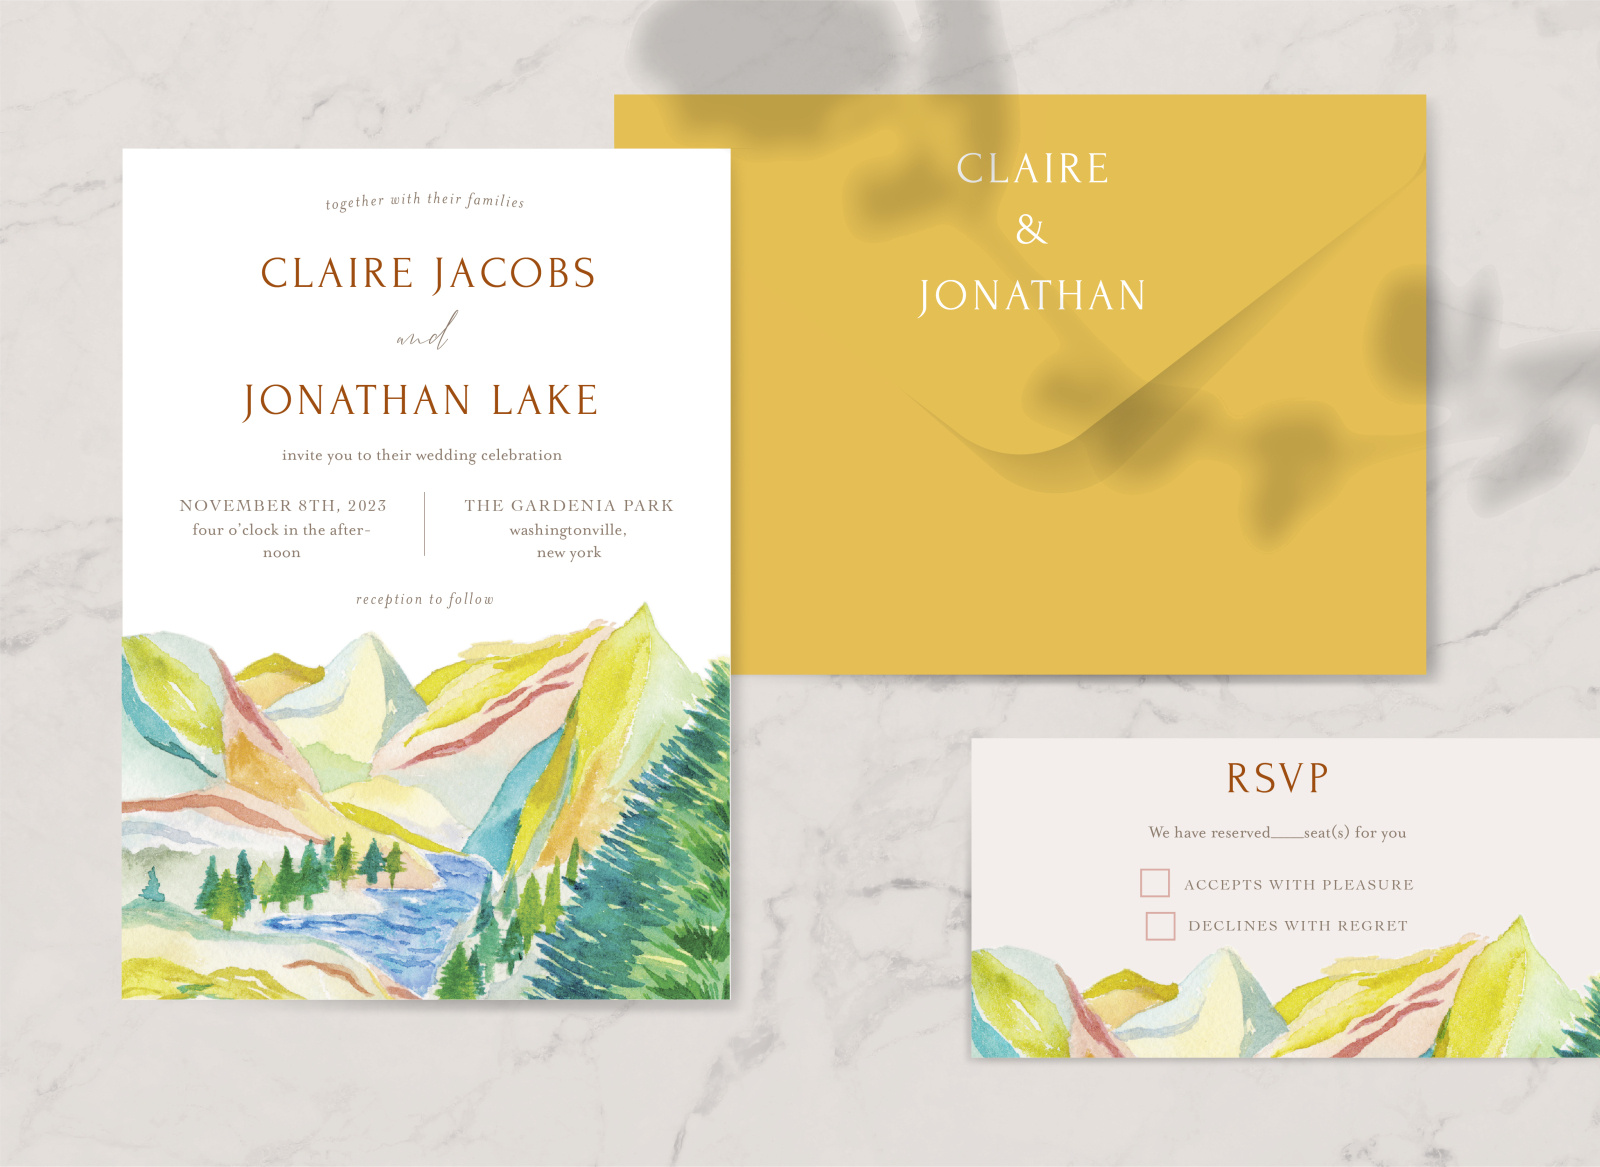 Landscape Inspired Wedding Invitation by arley moi on Dribbble